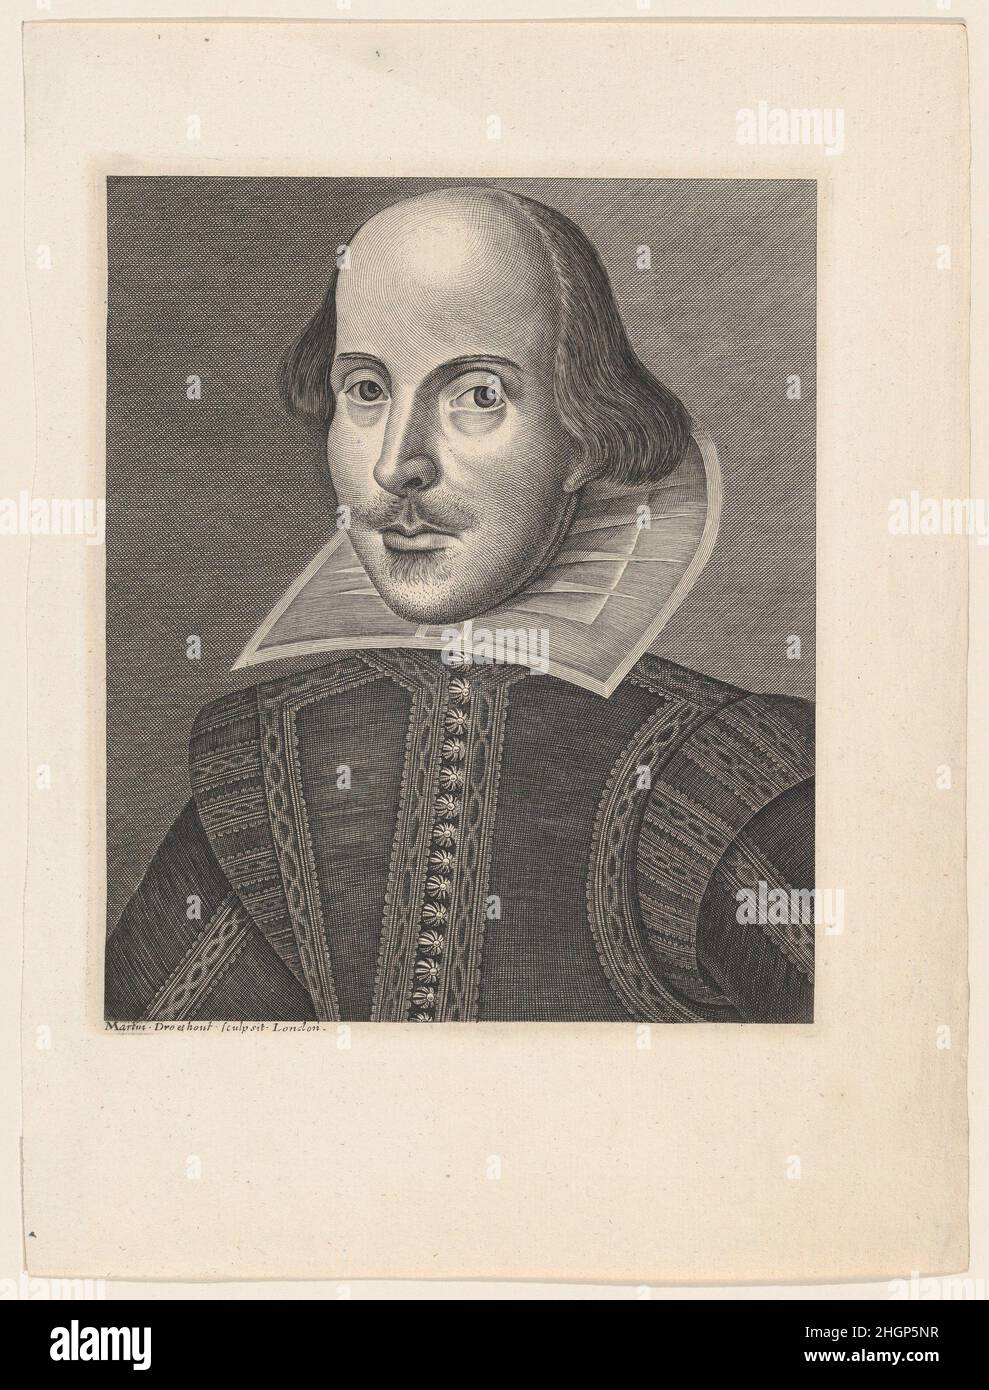 William Shakespeare 19th century After Martin Droeshout the Younger A watermark in the paper used for this print ('MICHALET') tells us that it is a nineteenth-century reproduction of Doeshout's famous portrait engraving. Made originally to embellish the title page of the First Folio (1623), the image portrays Shakespeare with a prominent forehead, long hair covering his ears, a mustache and mouche (patch of hair below his lower lip). He wears a starched white collar, and a doublet adorned with lace or braid and fastened with covered buttons. Since the original image was approved by actor frien Stock Photo